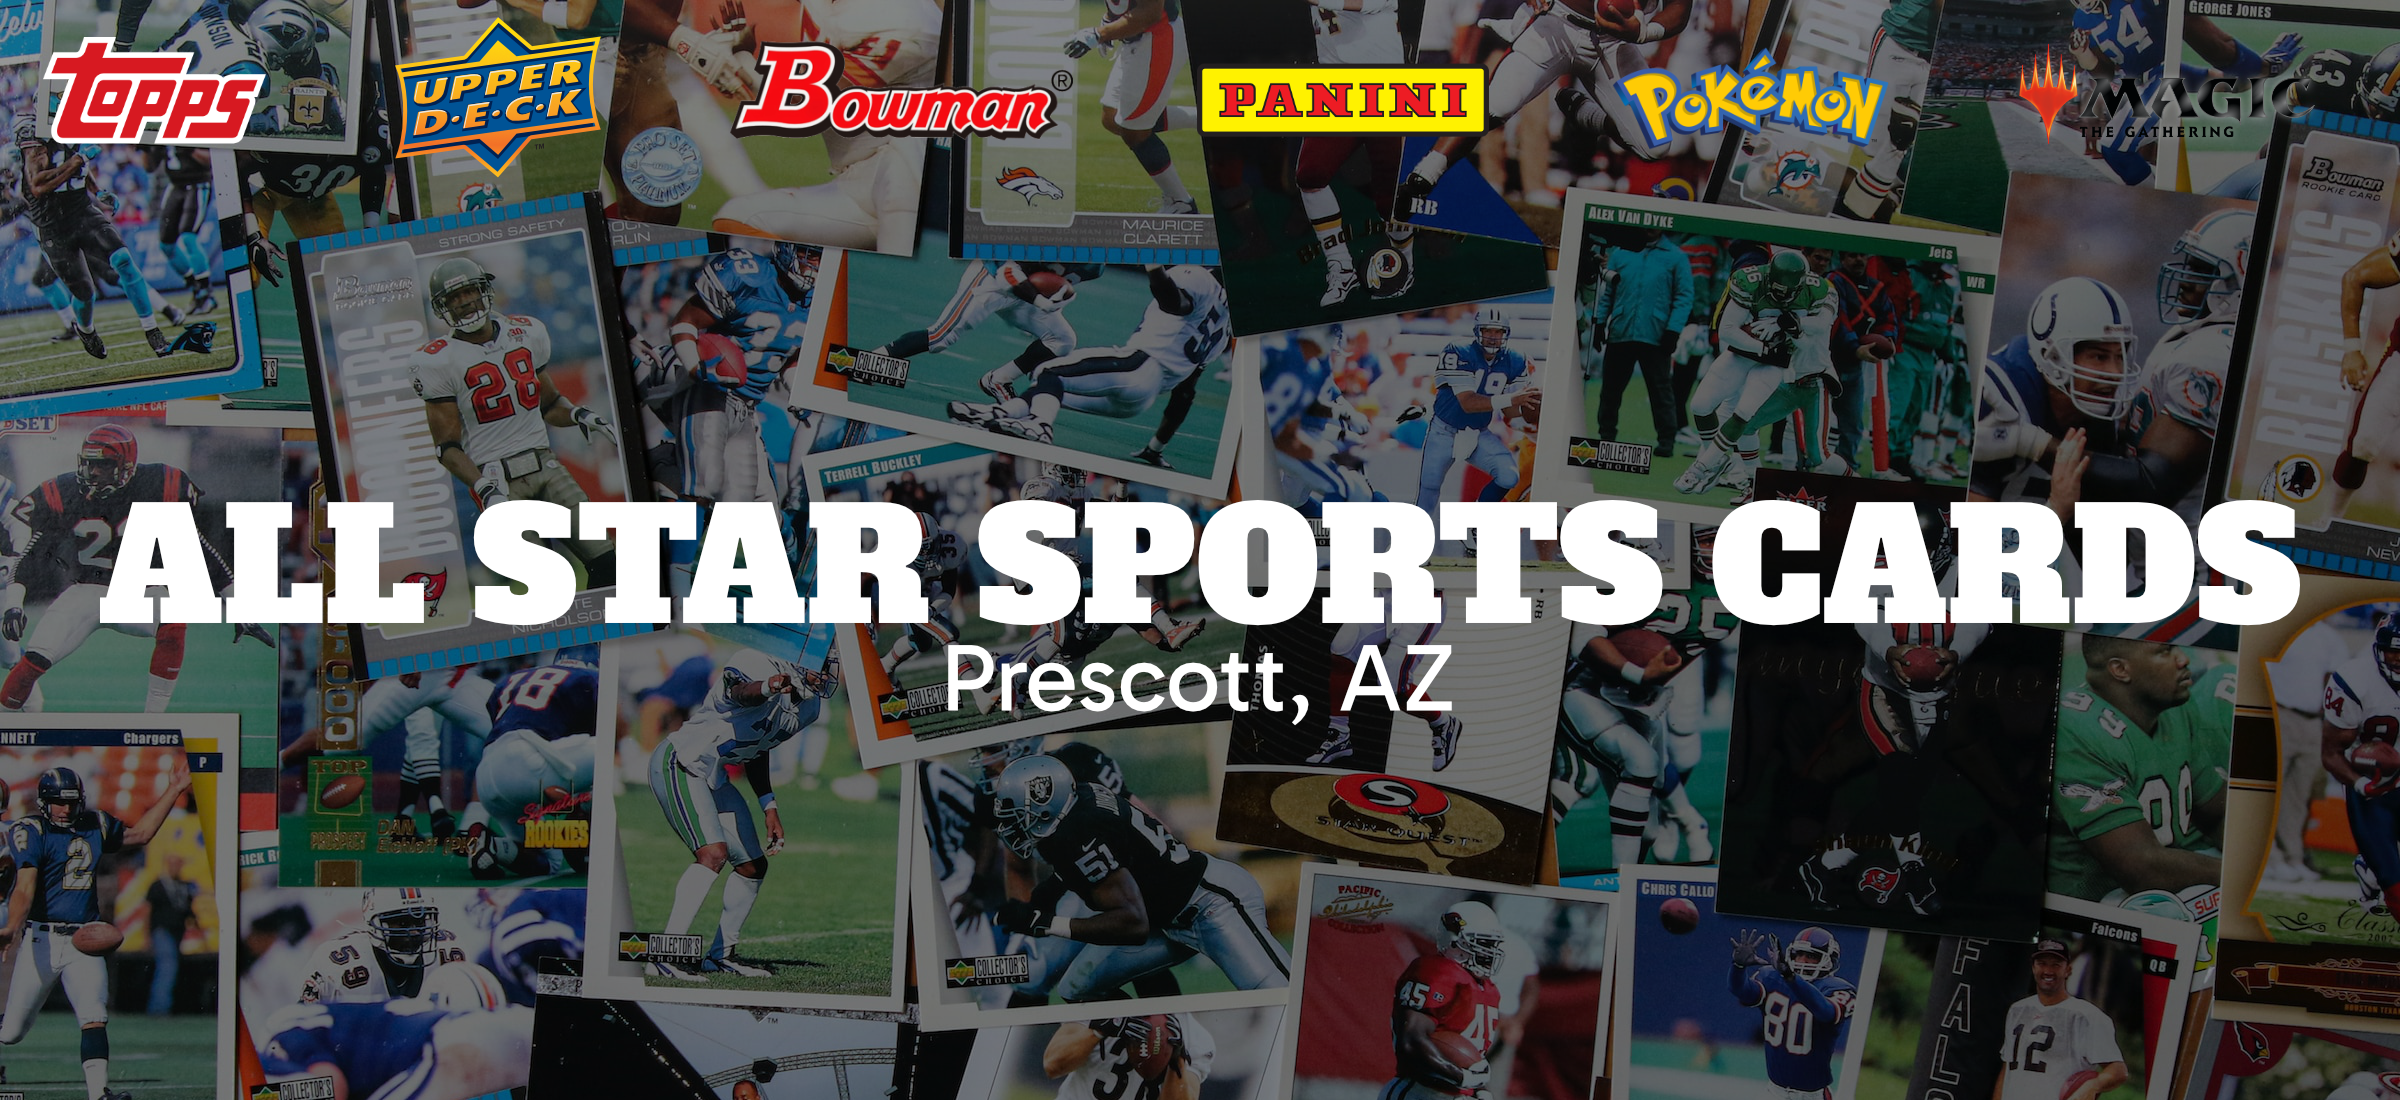 All Star Sports Cards! Best Sports Card, Trading Card, Collectibles and Memorobilia Shop in Prescott, Chino Valley, and Prescott Valley.